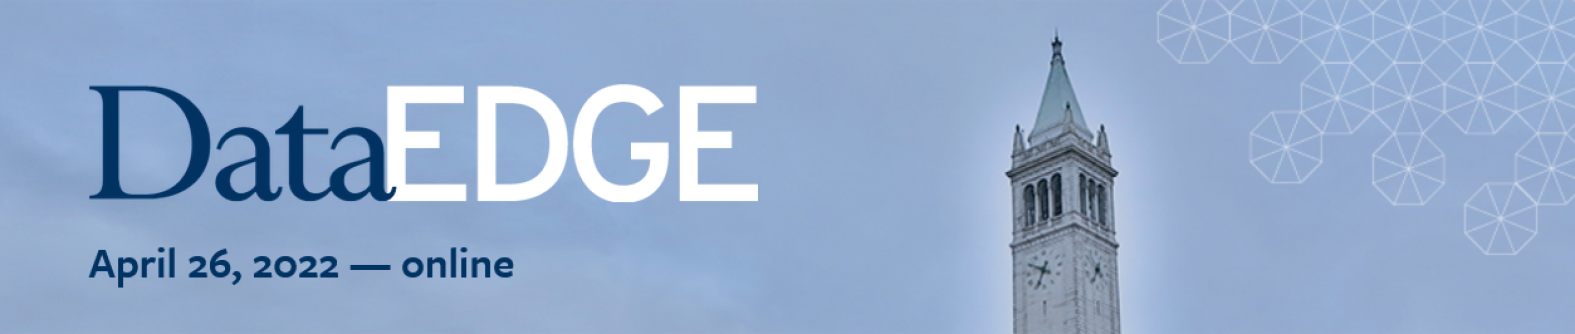 dataedge-2022-banner.png